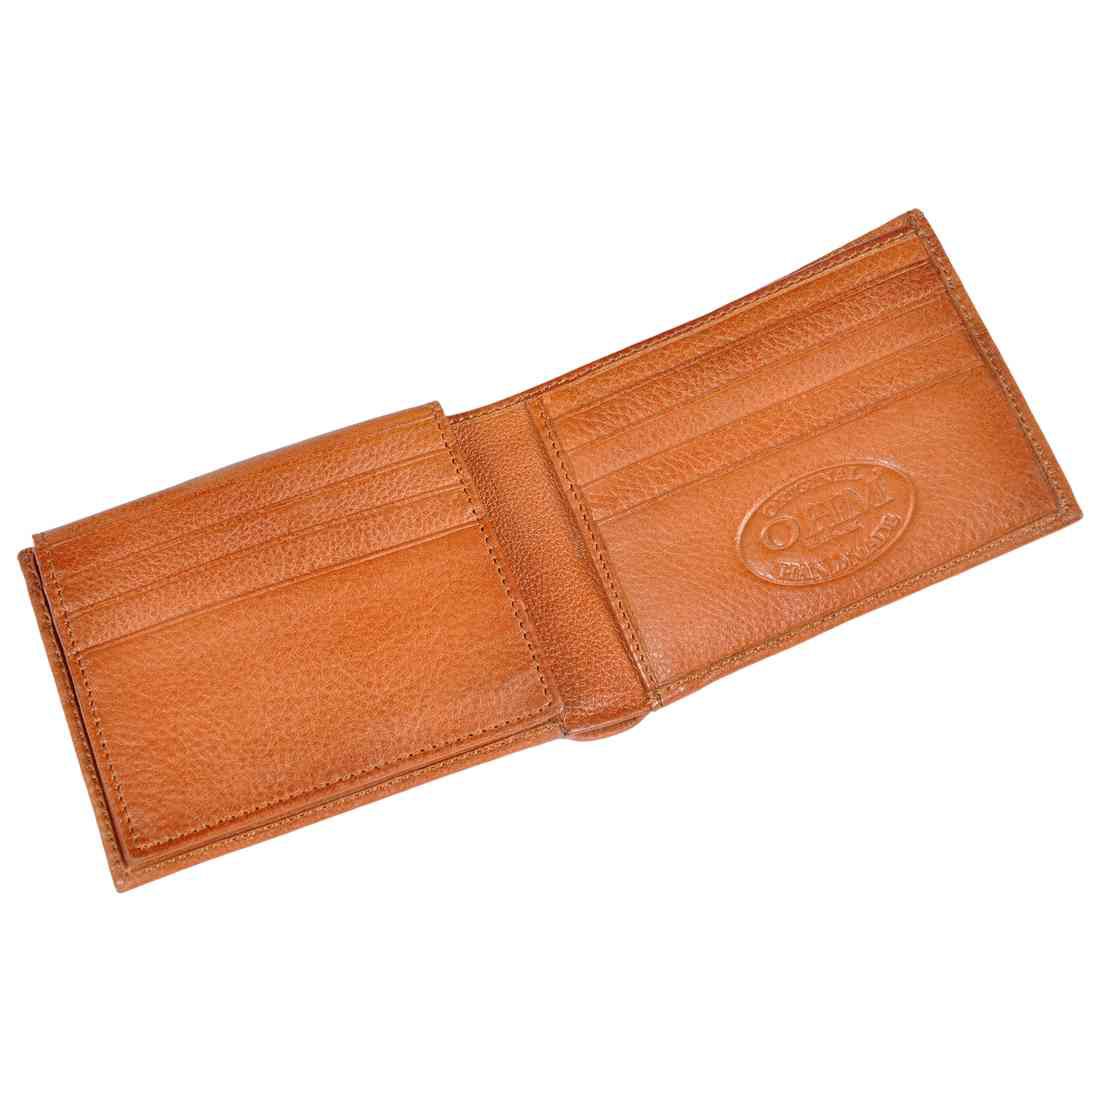 OHM New York Perimeter Stitched Leather Wallet